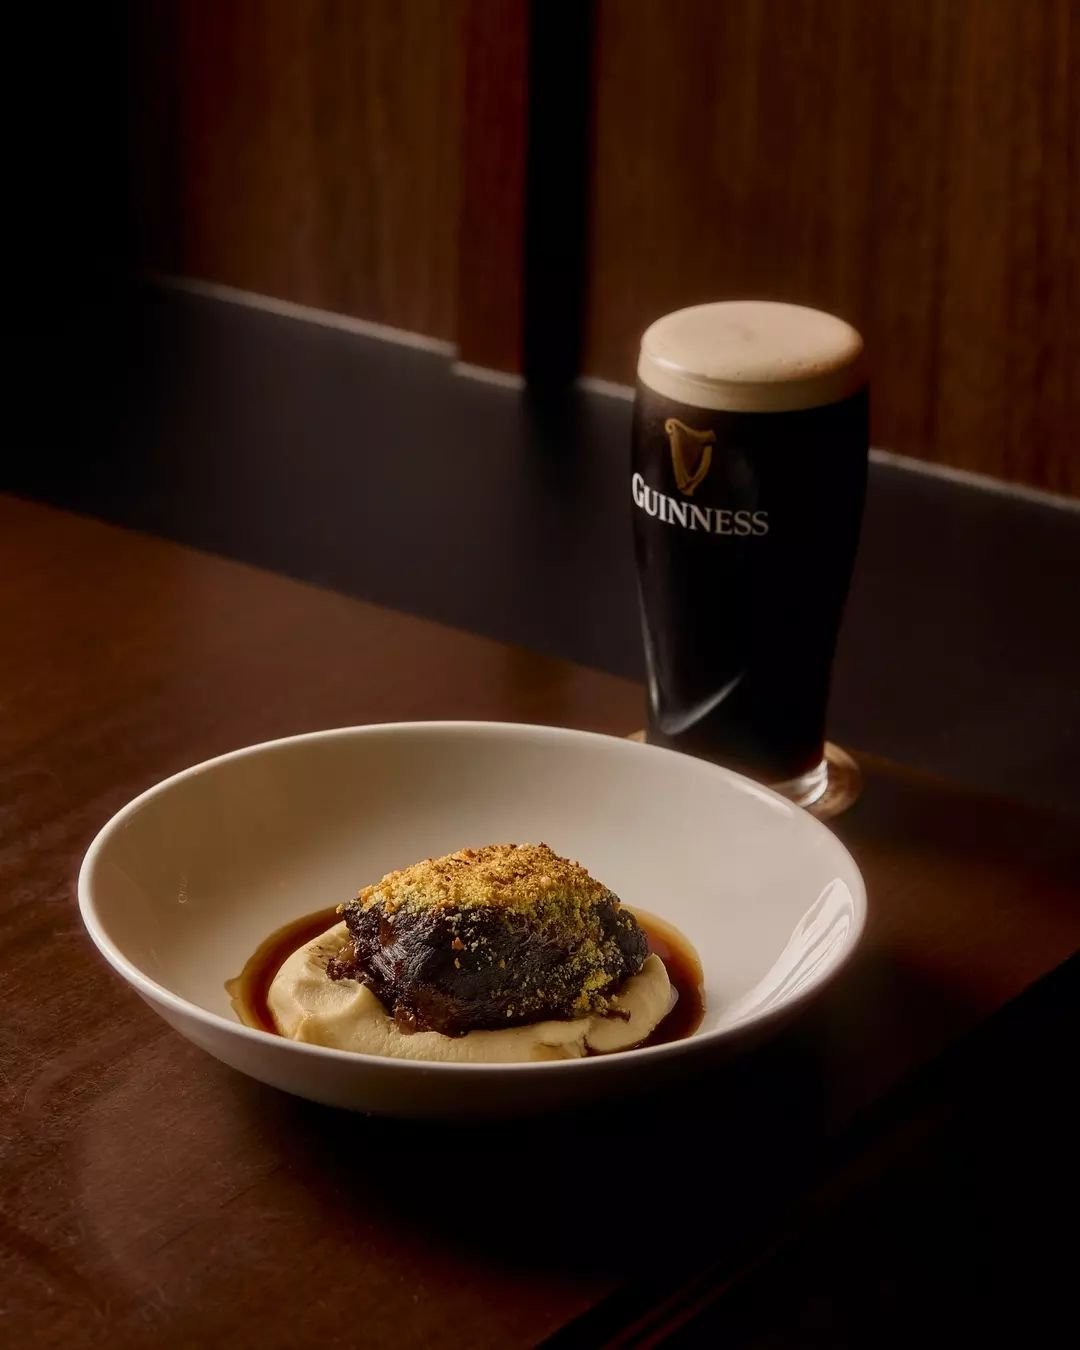 Cape Grim Beef Cheek with sherry &amp; juniper, whipped celeriac, carrot crumble. Just add a pint of Guinness and you've got dinner sorted.